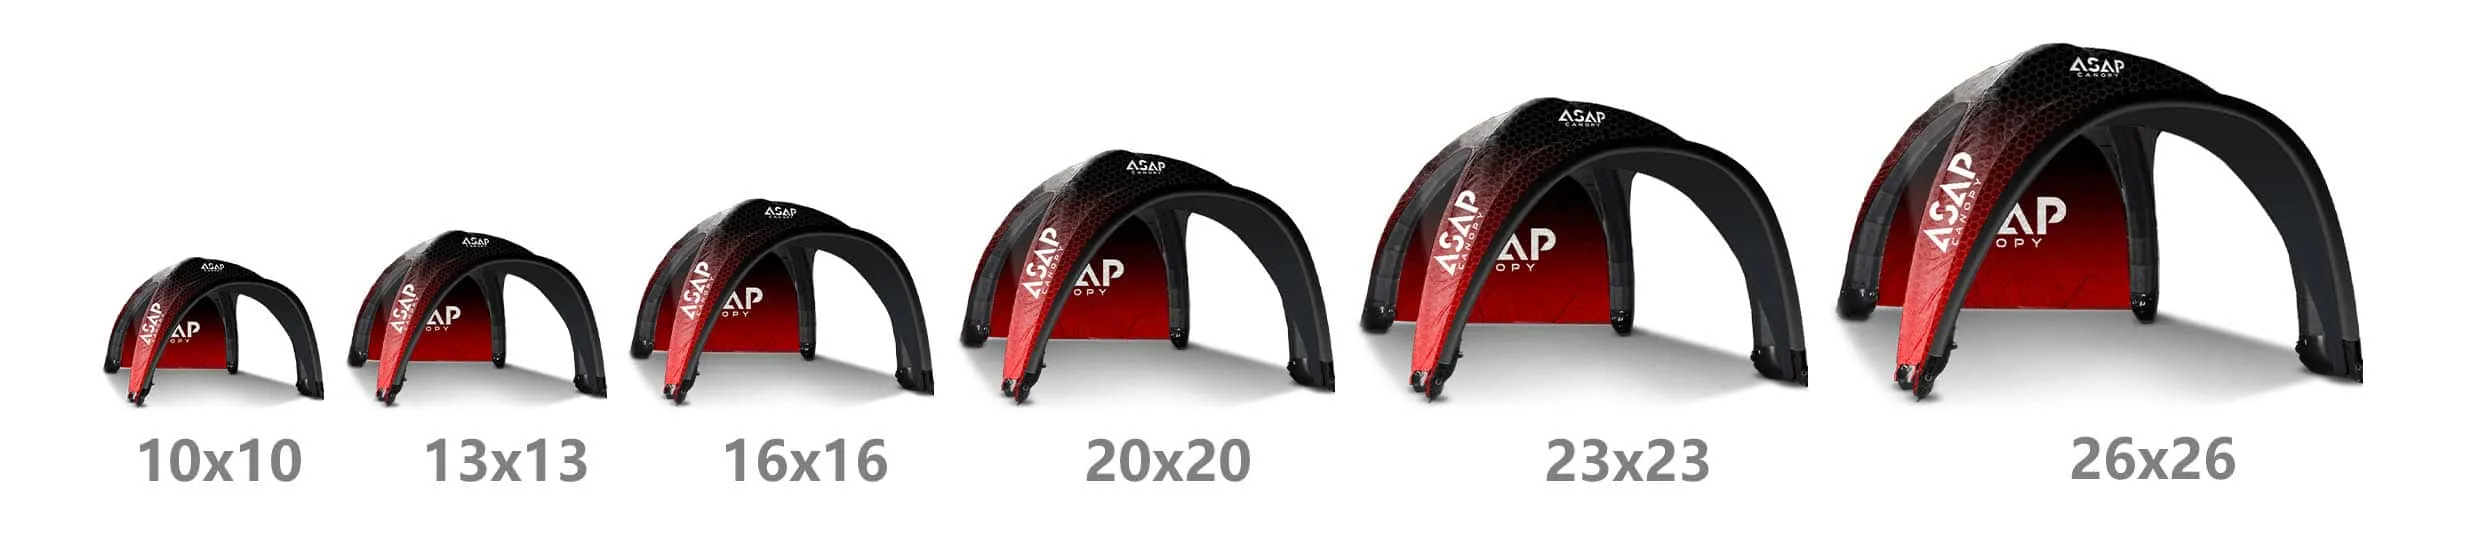 INFLATABLE CANOPY SPECIFICATIONS